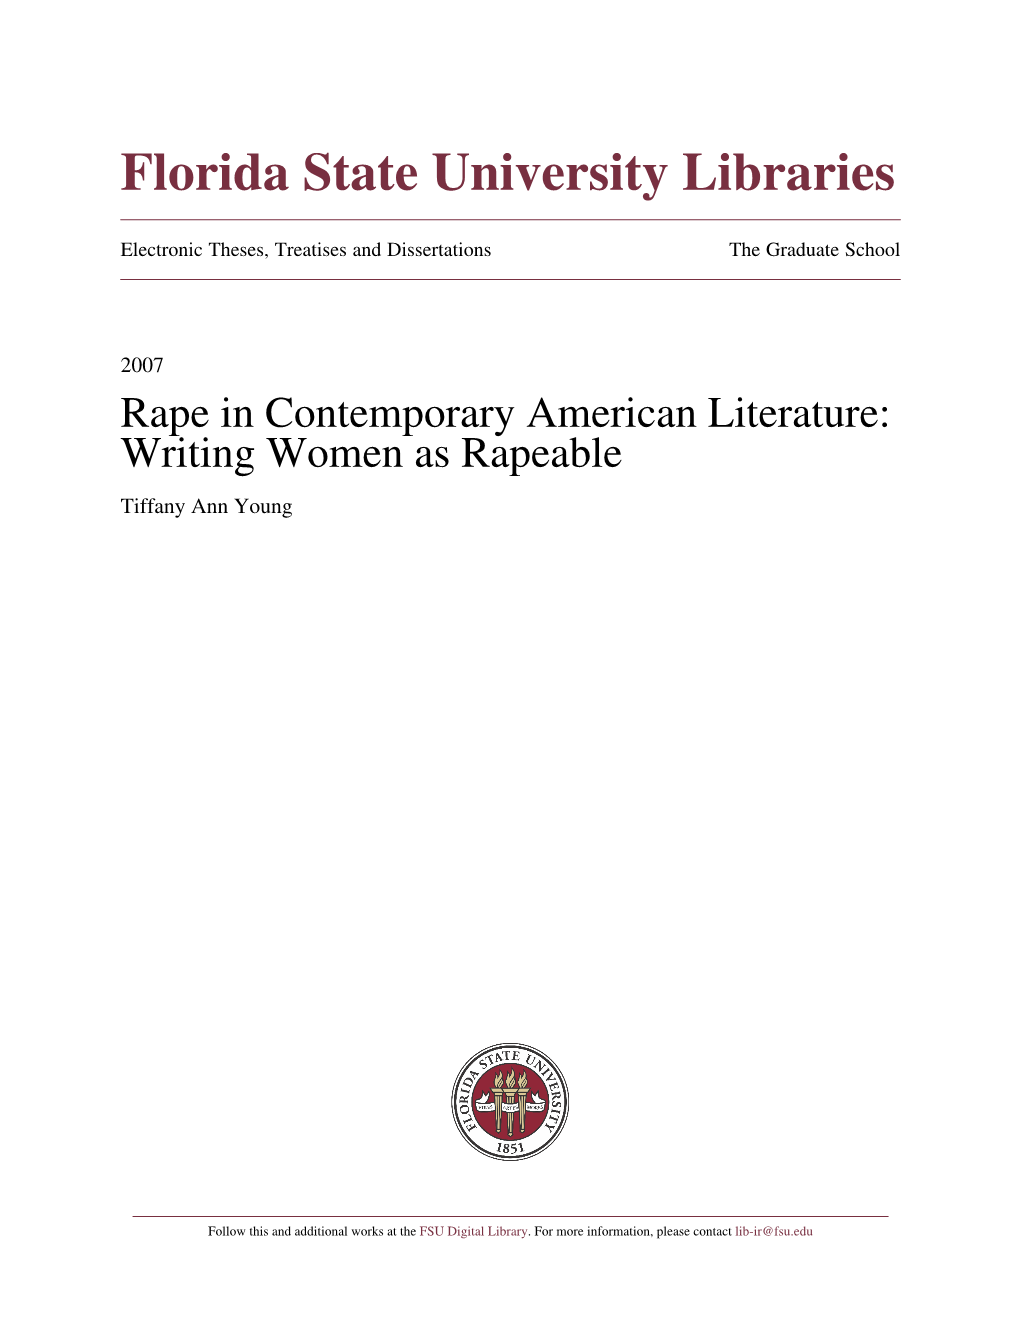 Rape in Contemporary American Literature: Writing Women As Rapeable Tiffany Ann Young